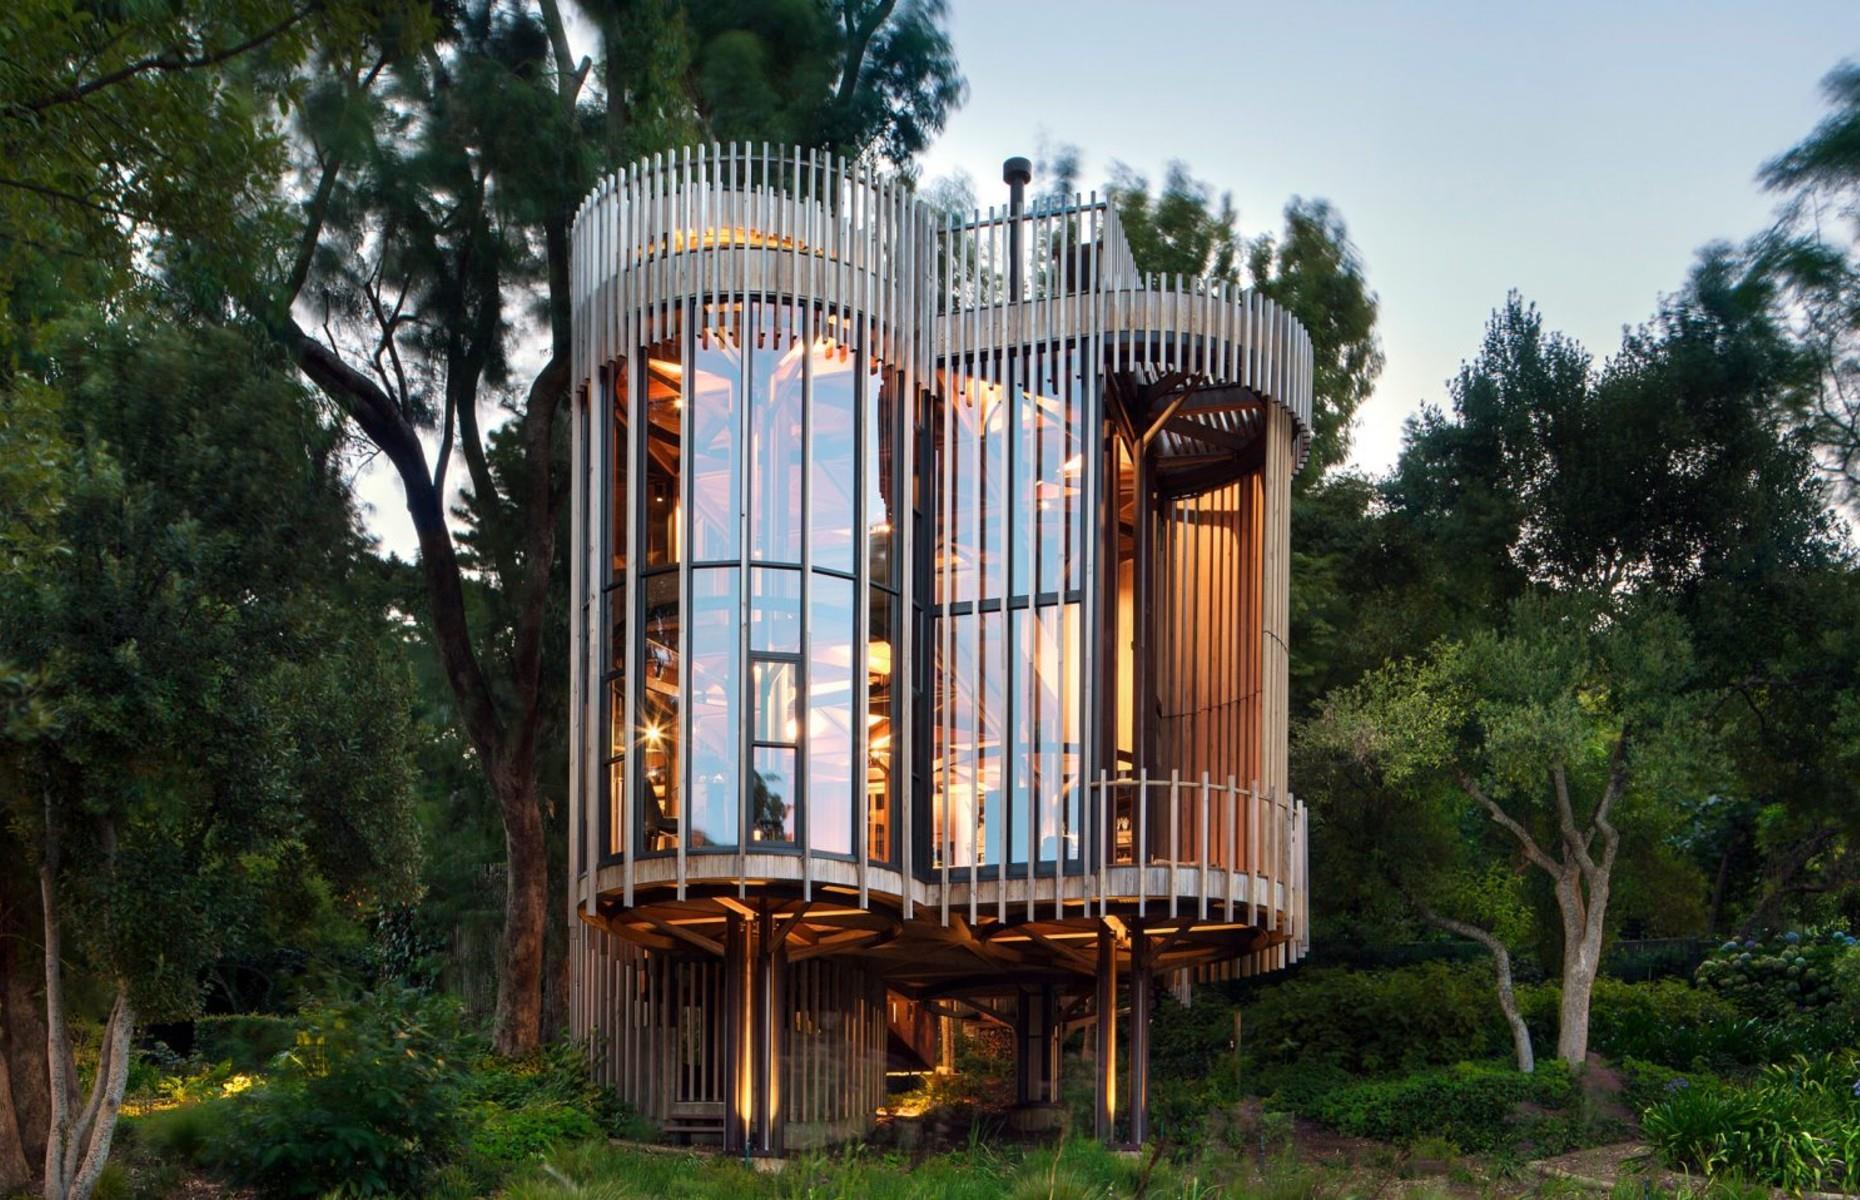 <p>Designed by Cape Town-based architecture studio <a href="http://www.malanvorster.co.za/">Malan Vorster</a>, this spectacular treehouse is the ultimate wilderness retreat. Formed from glass and four cylindrical towers of untreated red cedar, the one-of-a-kind tiny home merges into its woodland setting. Built on a steep sloping plot, the house is elevated off the ground by stilts, in a bid to preserve the surrounding environment. </p>